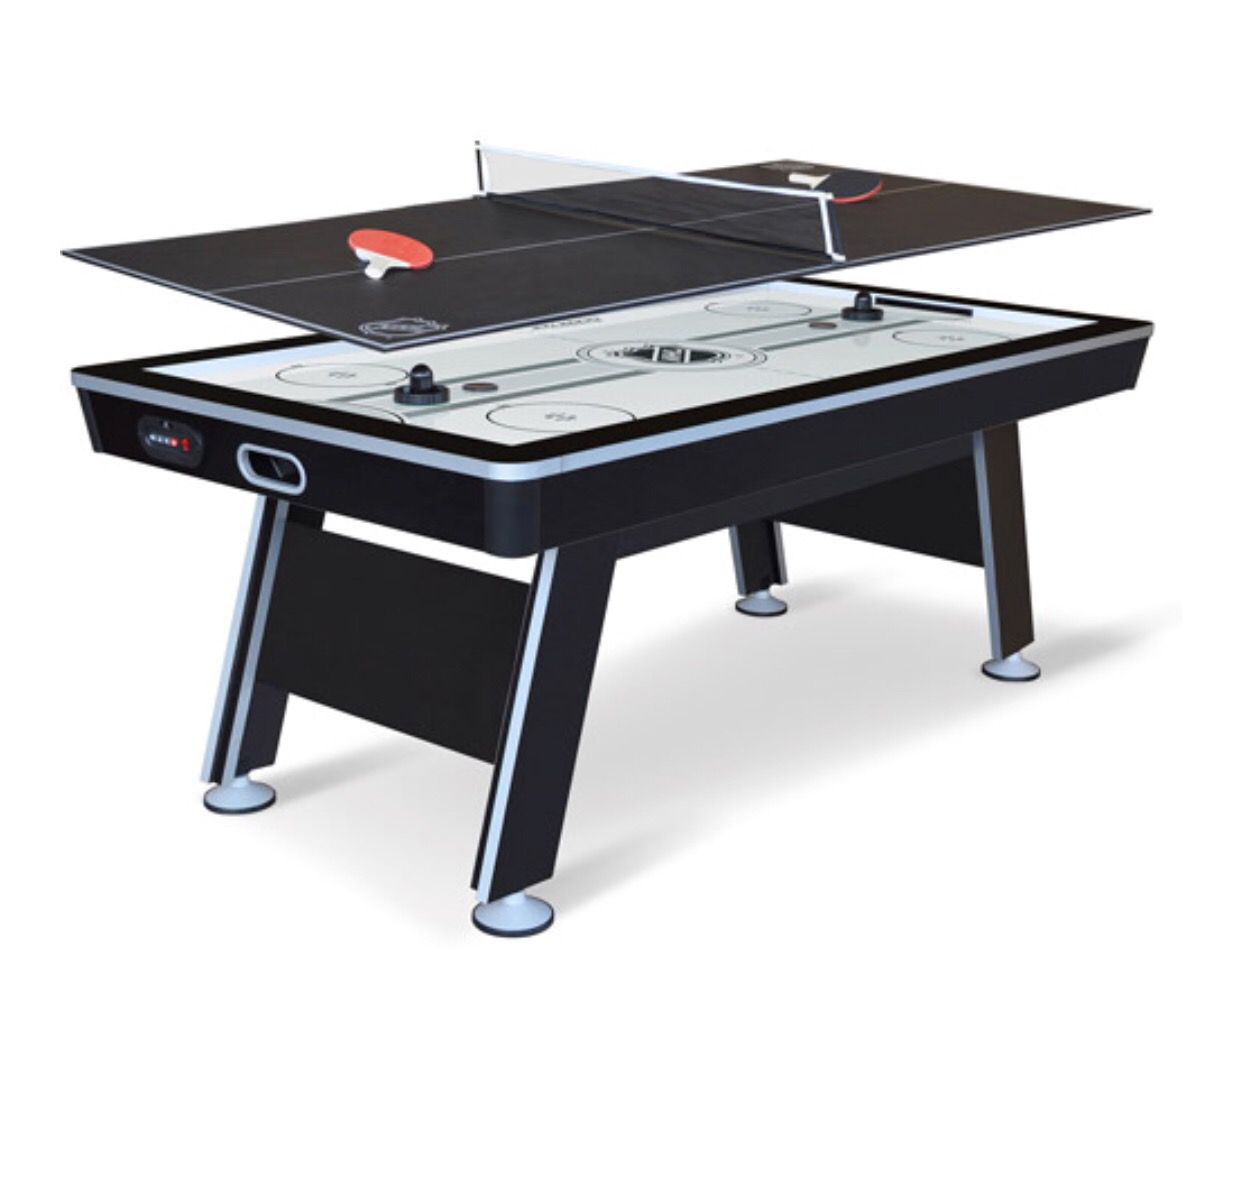 NHL 80- inch air powered hover hockey table with bonus table tennis top